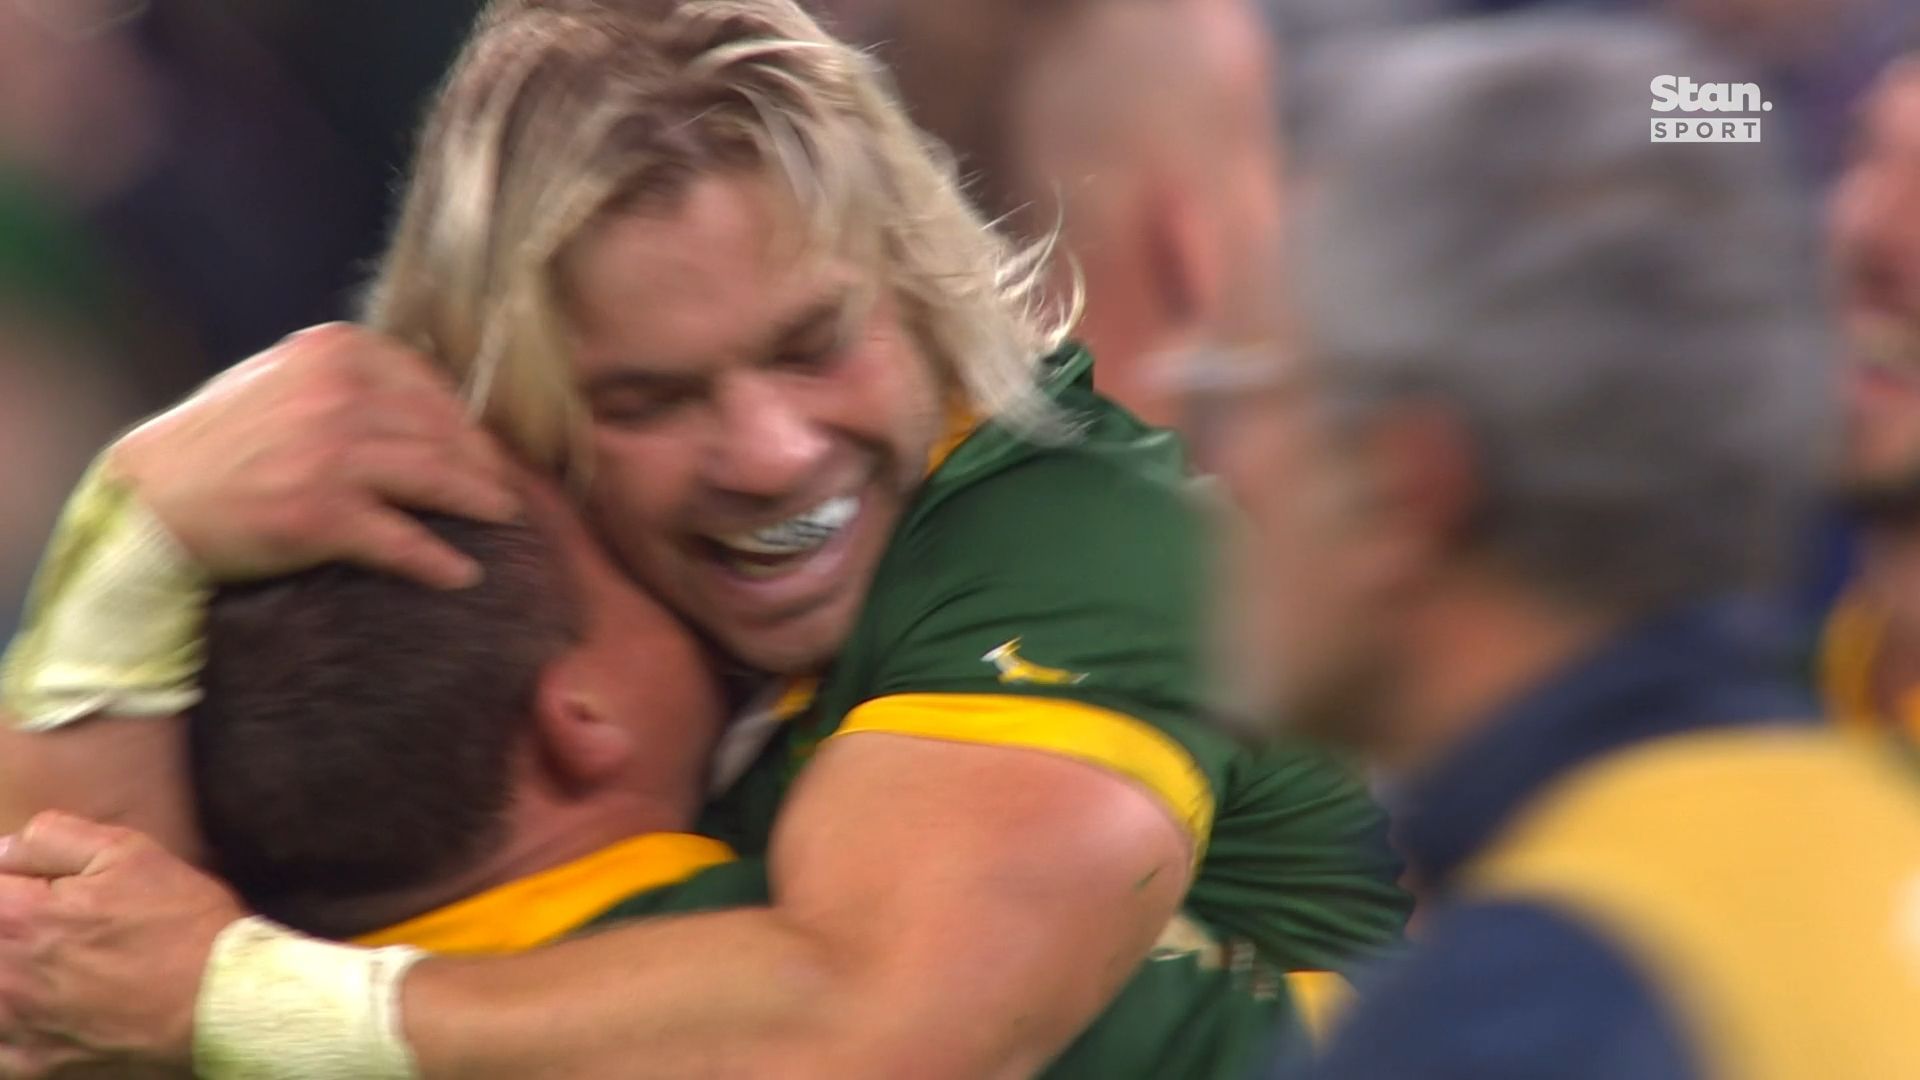 South Africa shatters French dreams in one-point Rugby World Cup quarter-final thriller